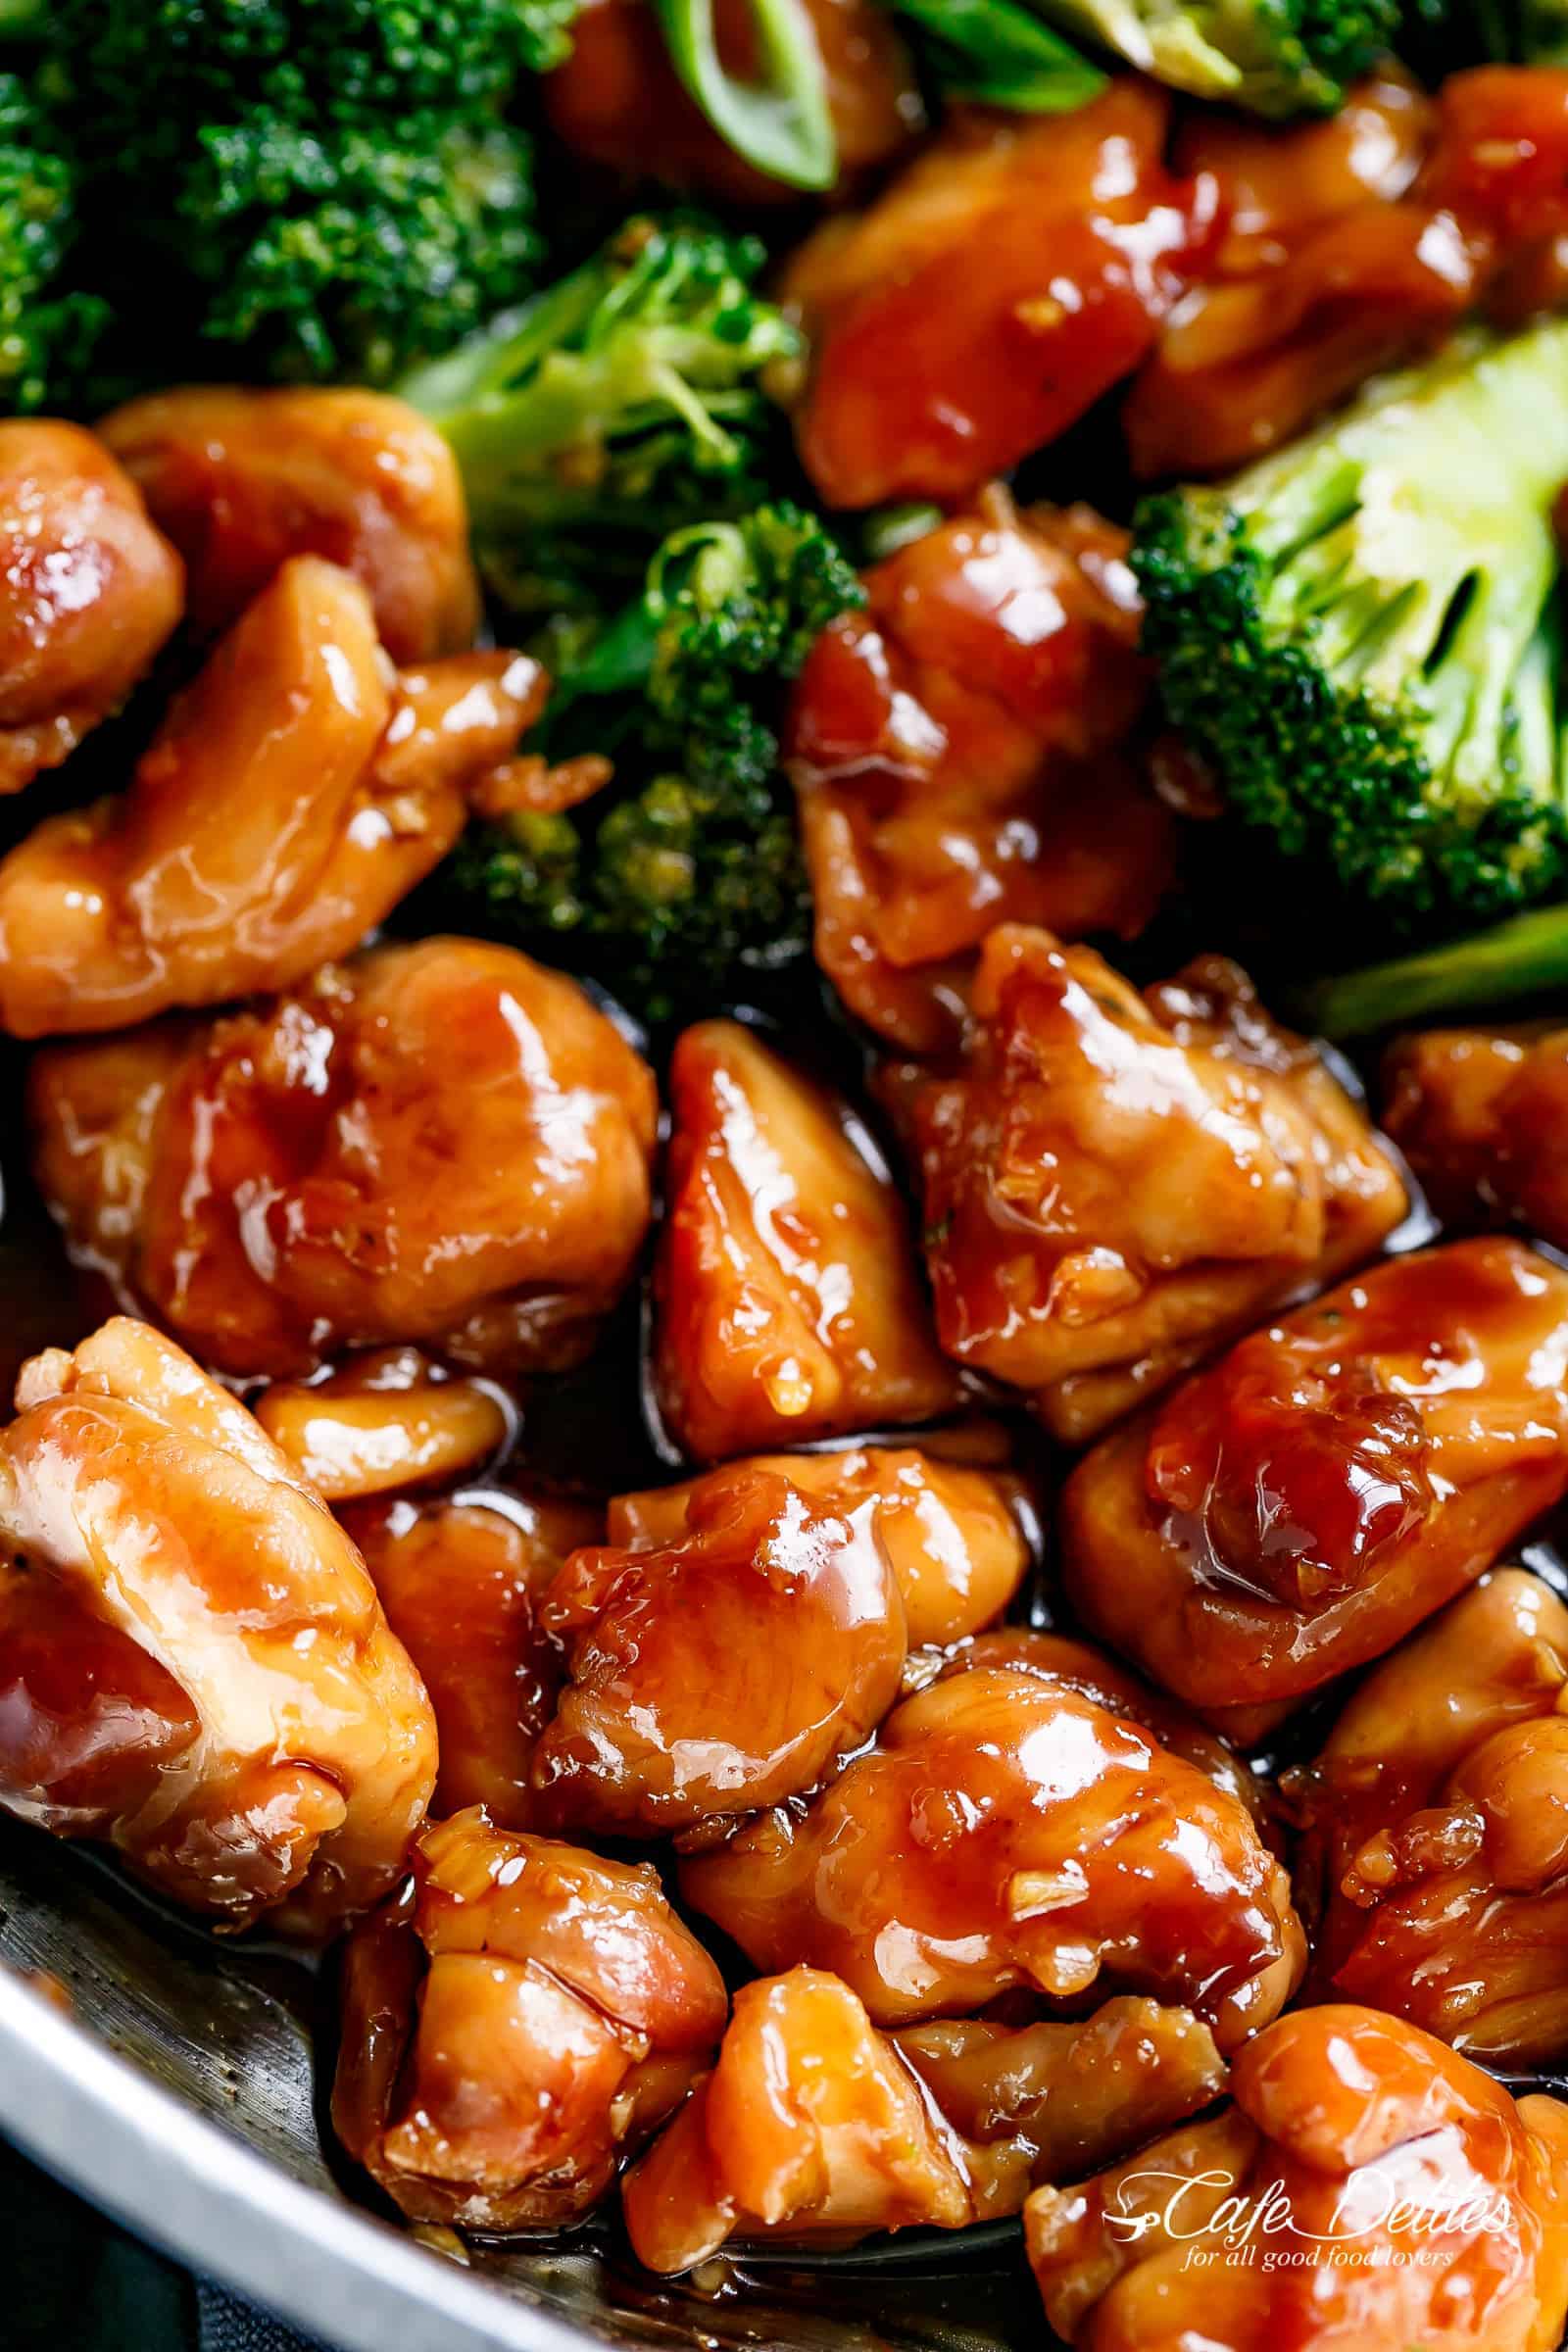 Teriyaki Chicken Recipe in a beautiful authentic flavoured homemade teriyaki sauce. A hint of garlic adds a twist on a traditional Japanese Teriyaki. Better than bottled sauce! | cafedelites.com